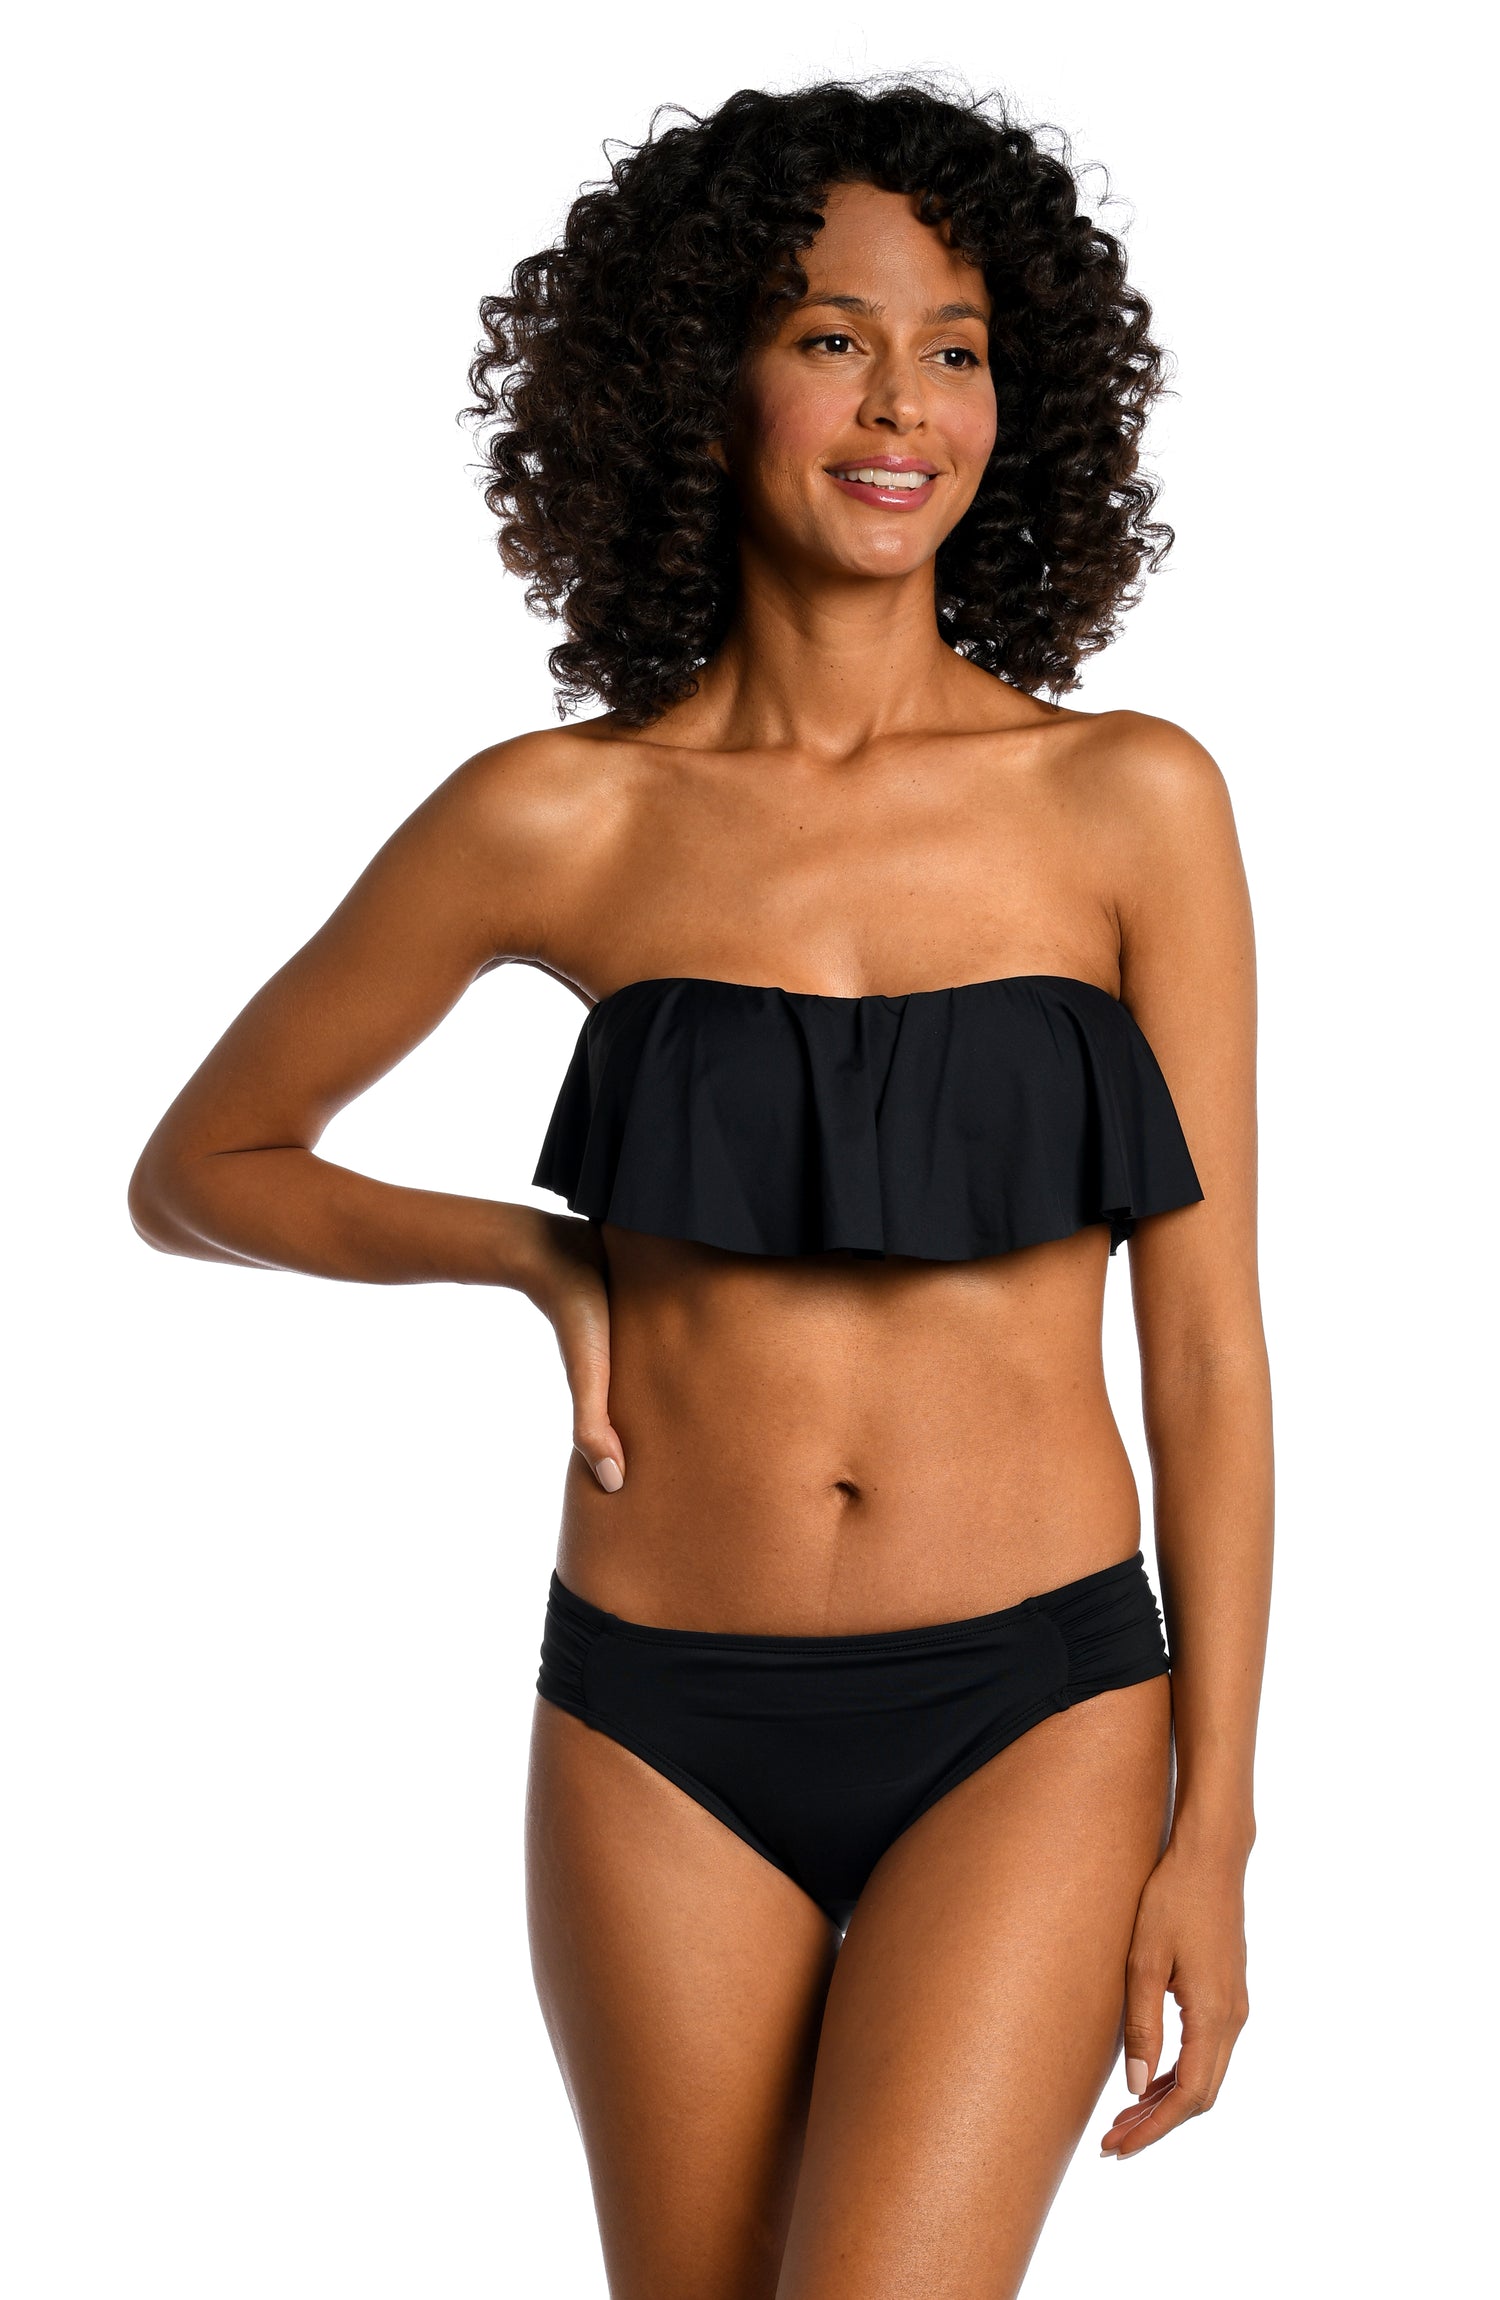 Model is wearing a black ruffle bandeau swimsuit top from our Best-Selling Island Goddess collection.